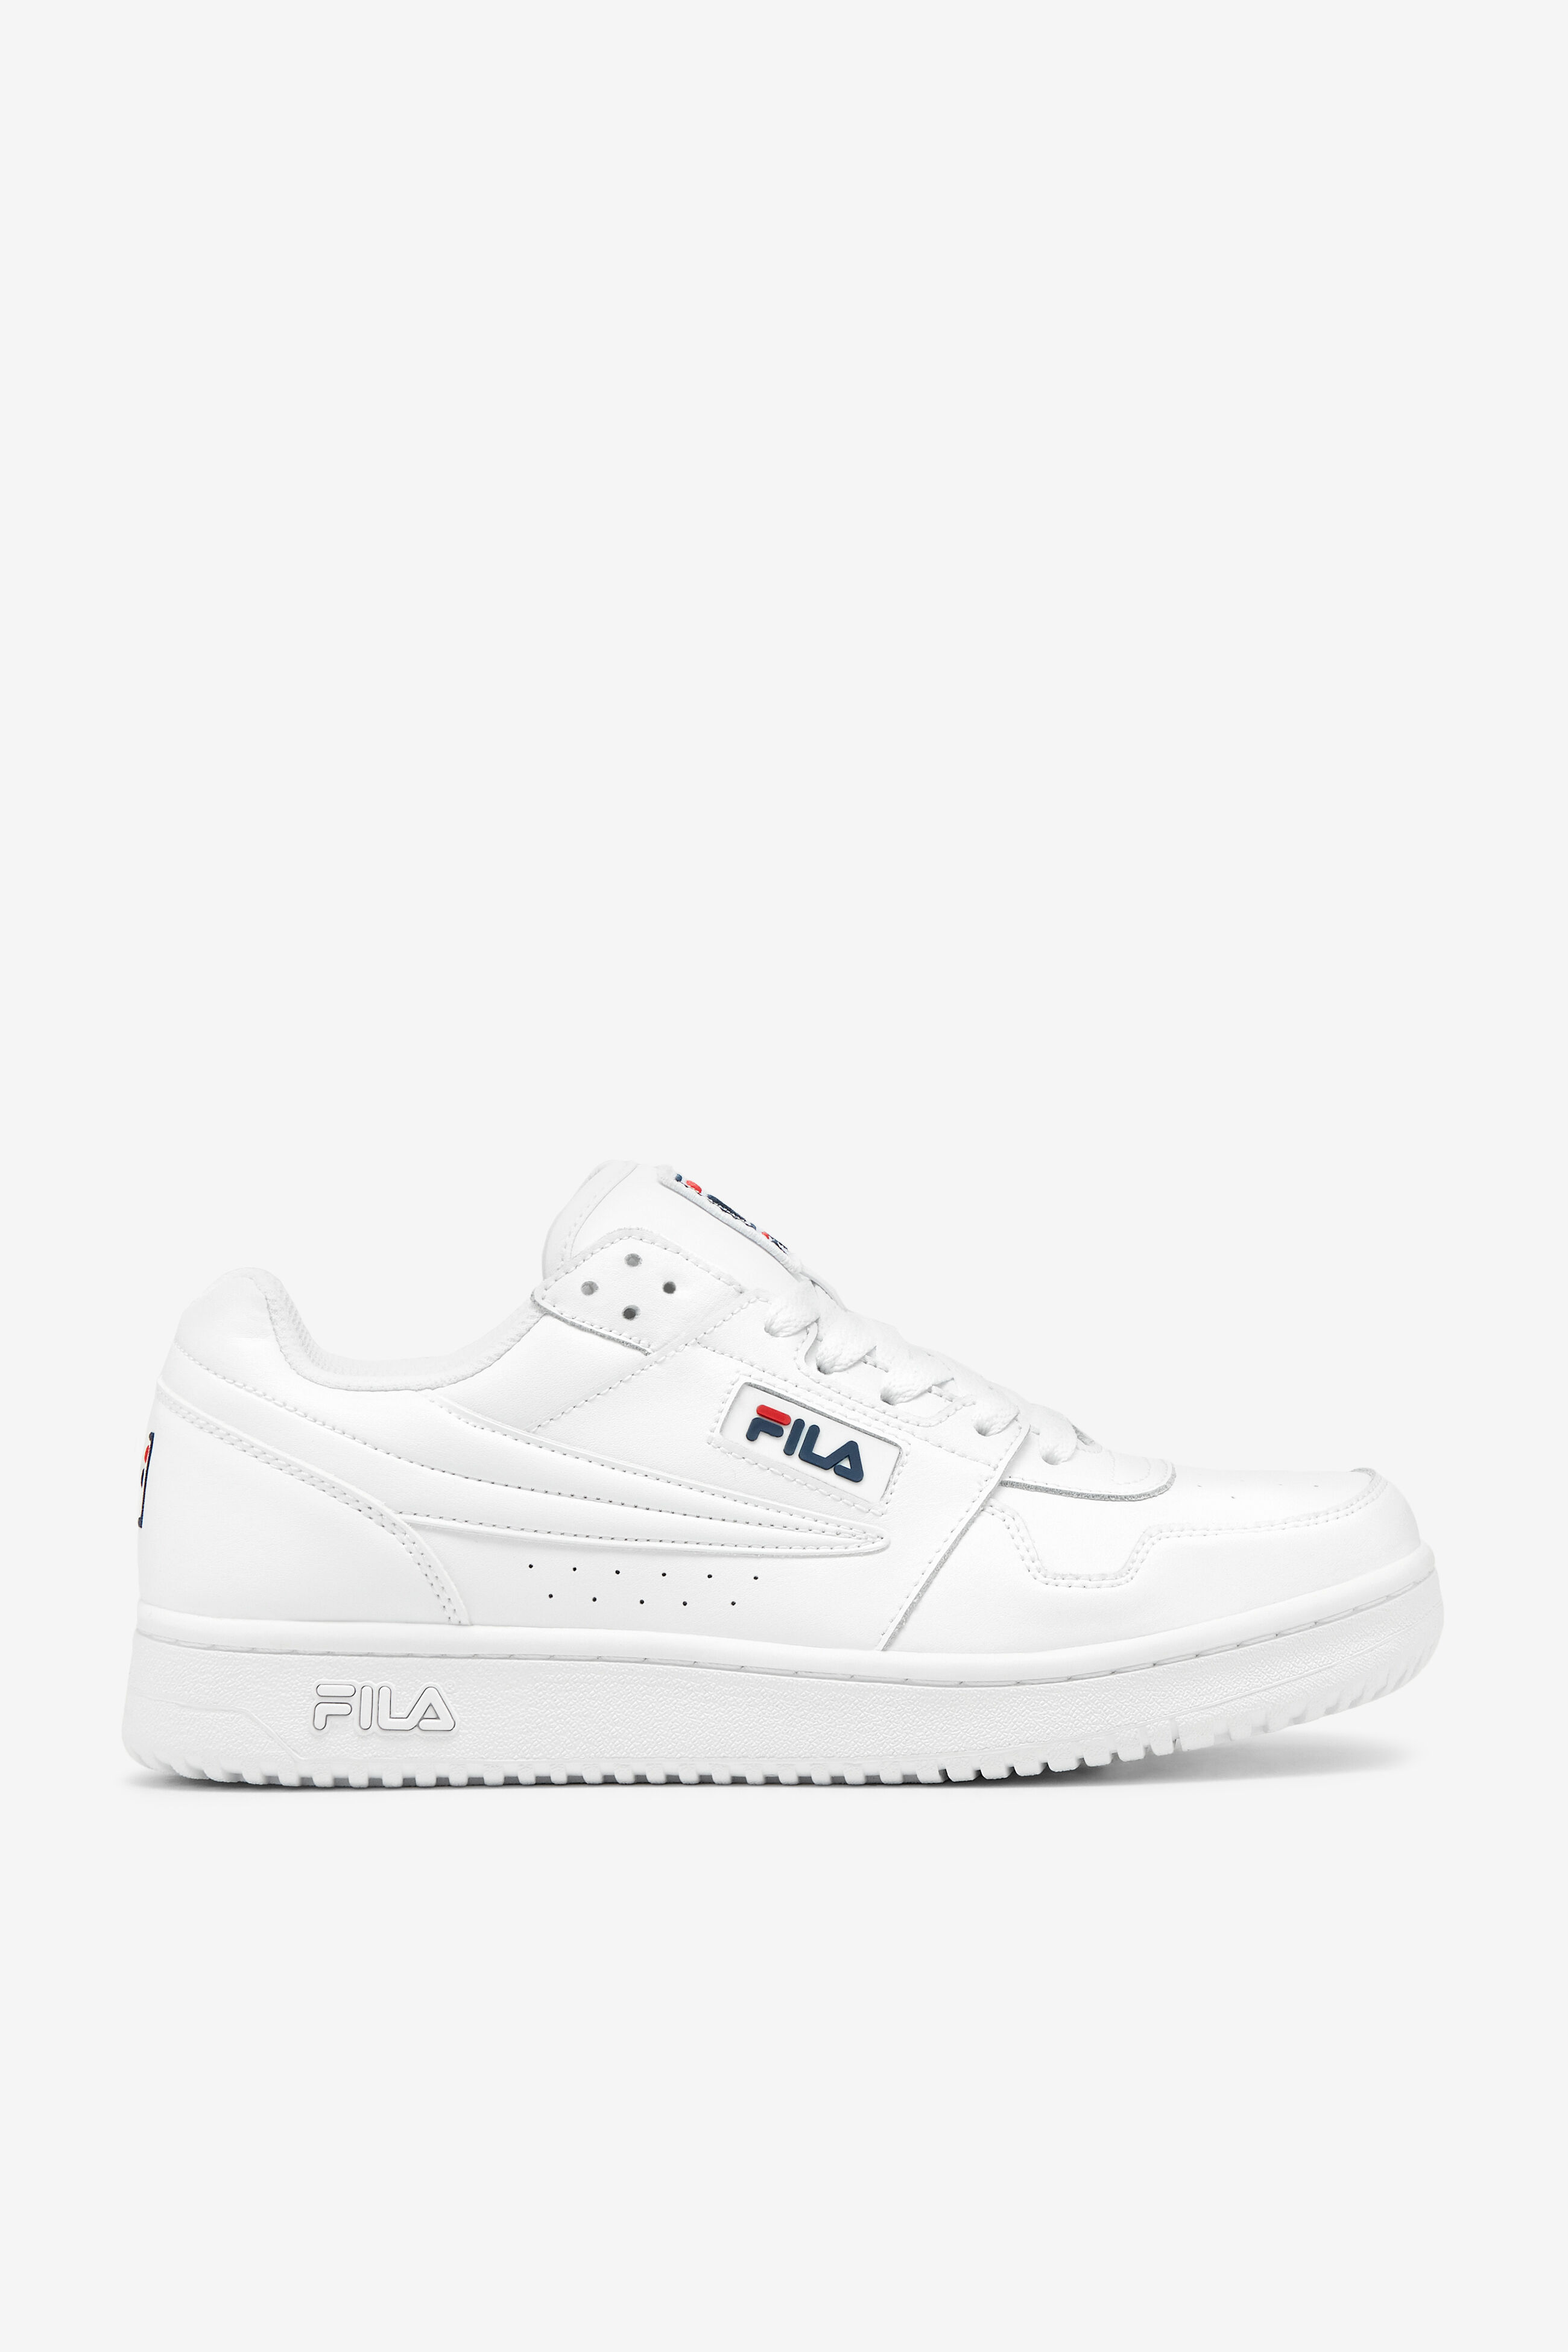 Fila Impress Il 1FM01154-125 Mens White Synthetic Lifestyle Sneakers Shoes  - Helia Beer Co